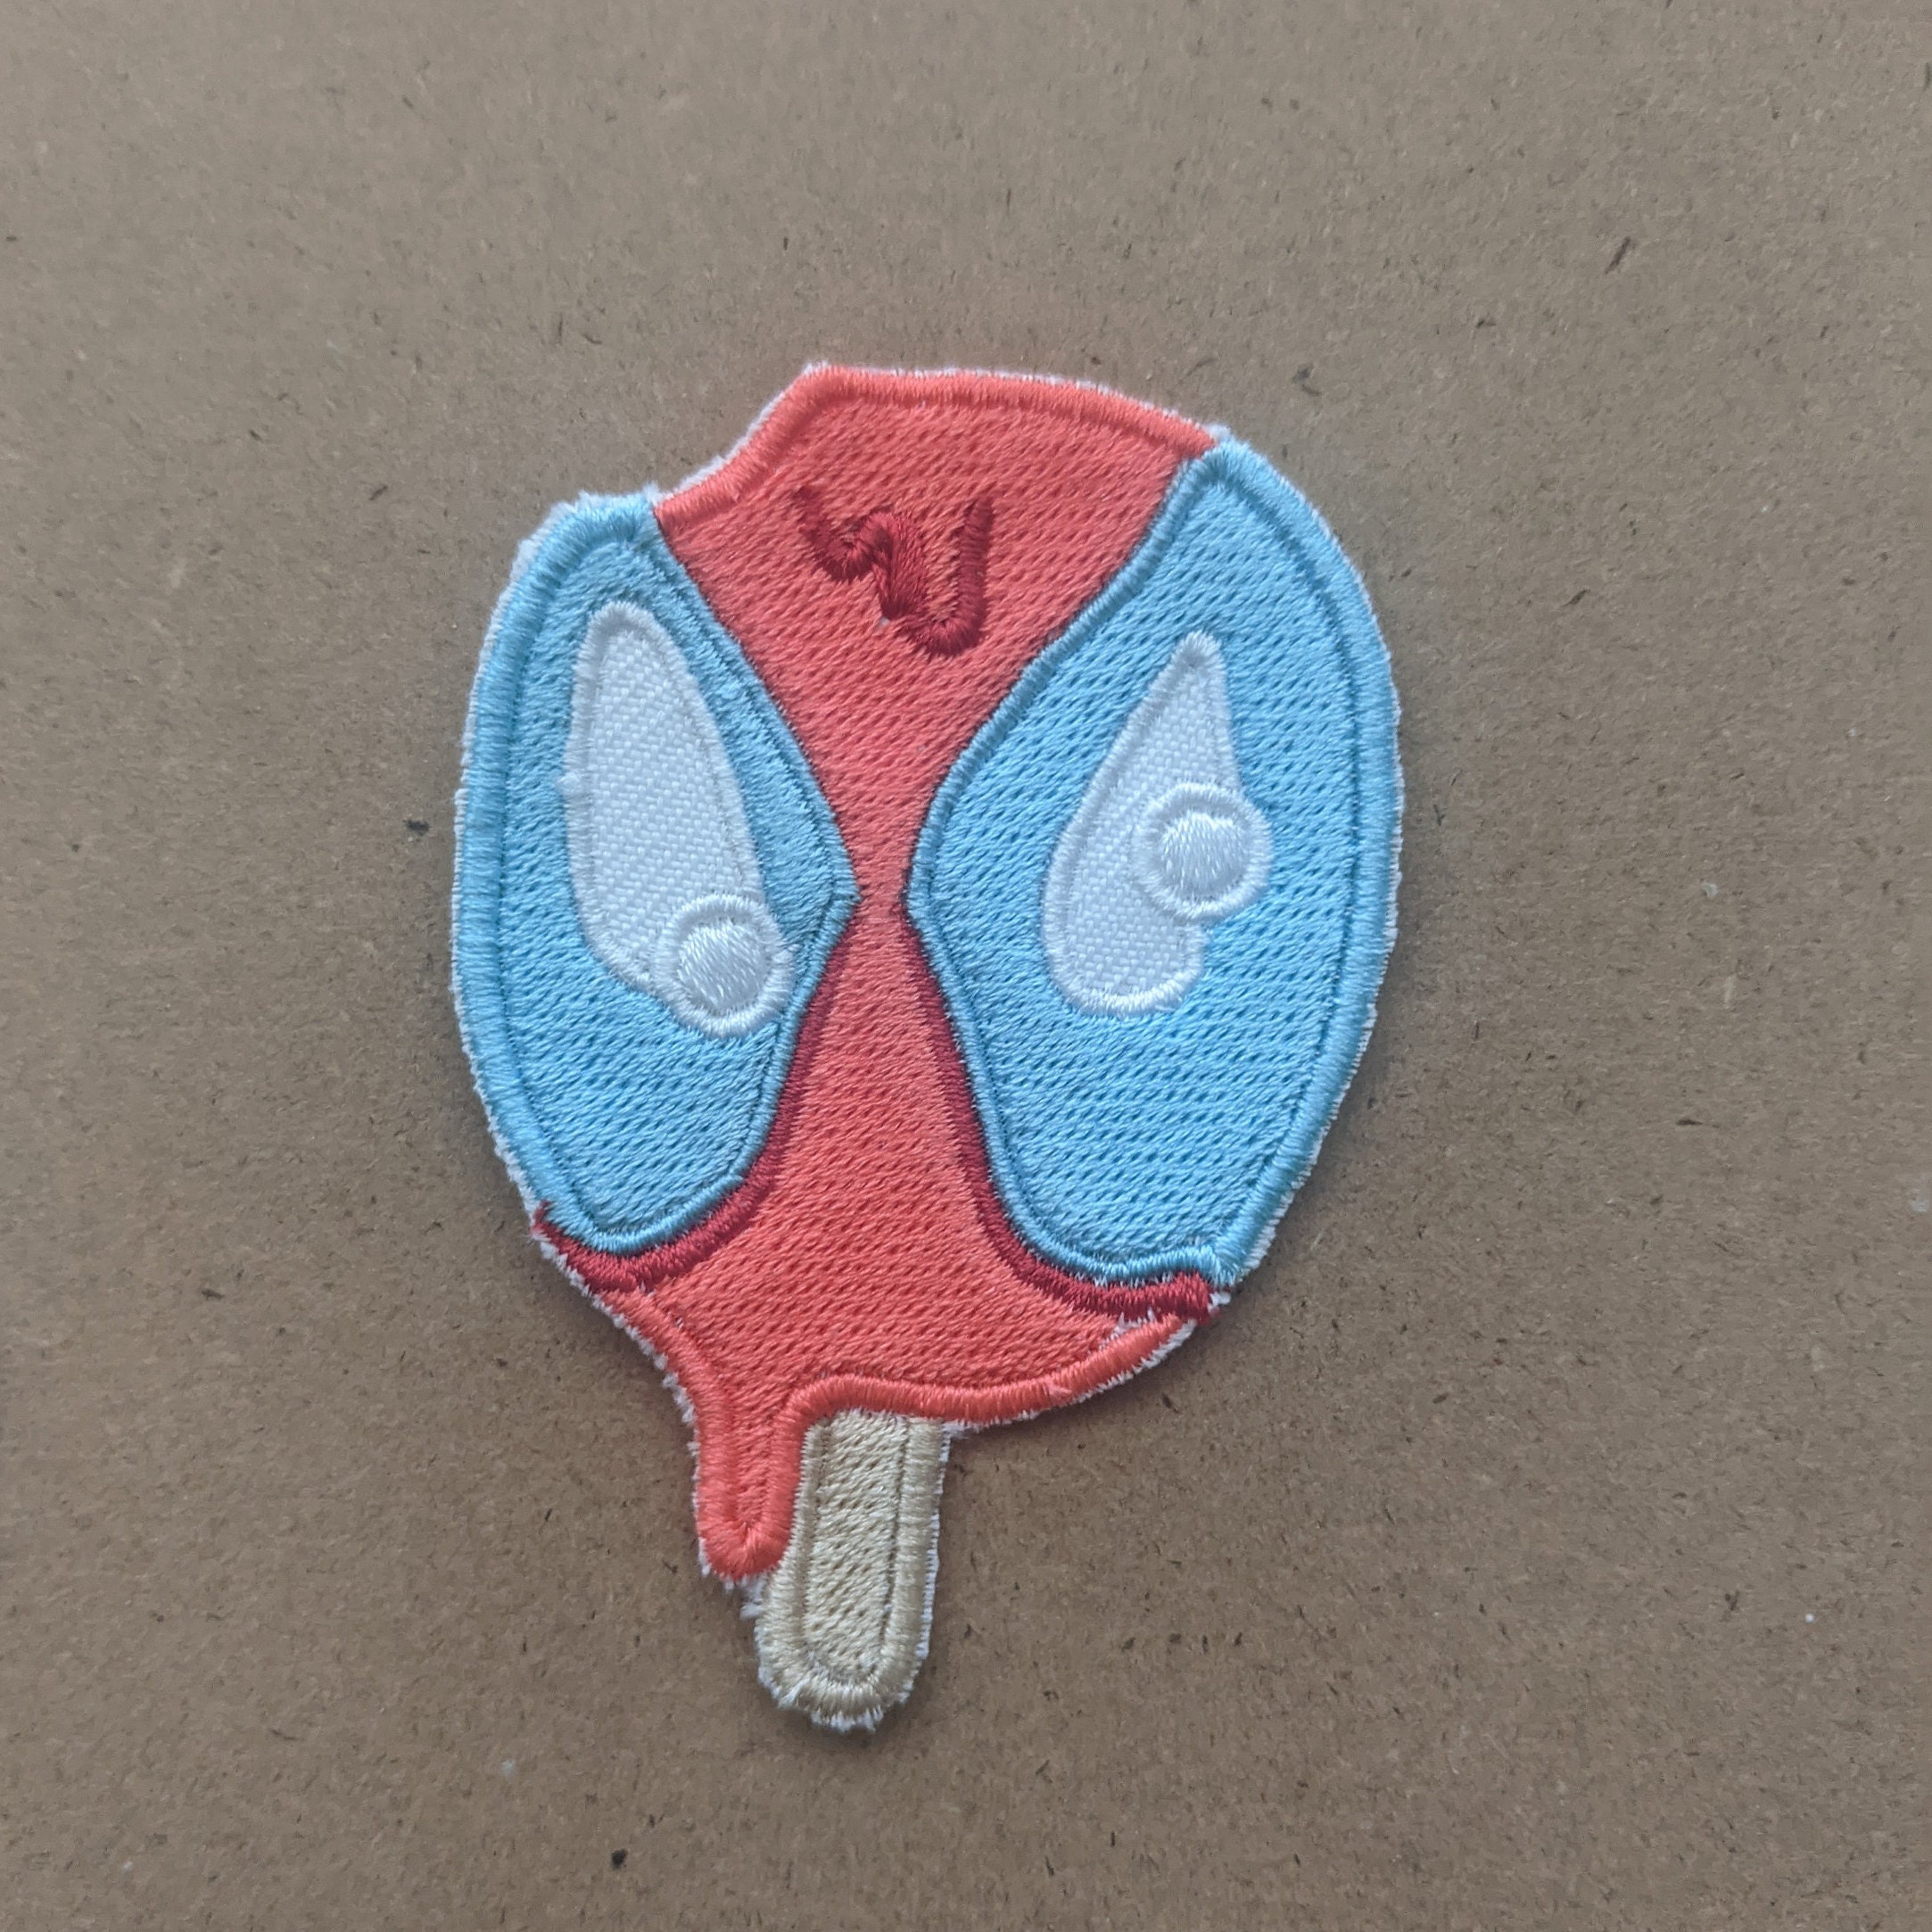 Spider-man Popsicle Iron-on Patch Homemade - Etsy